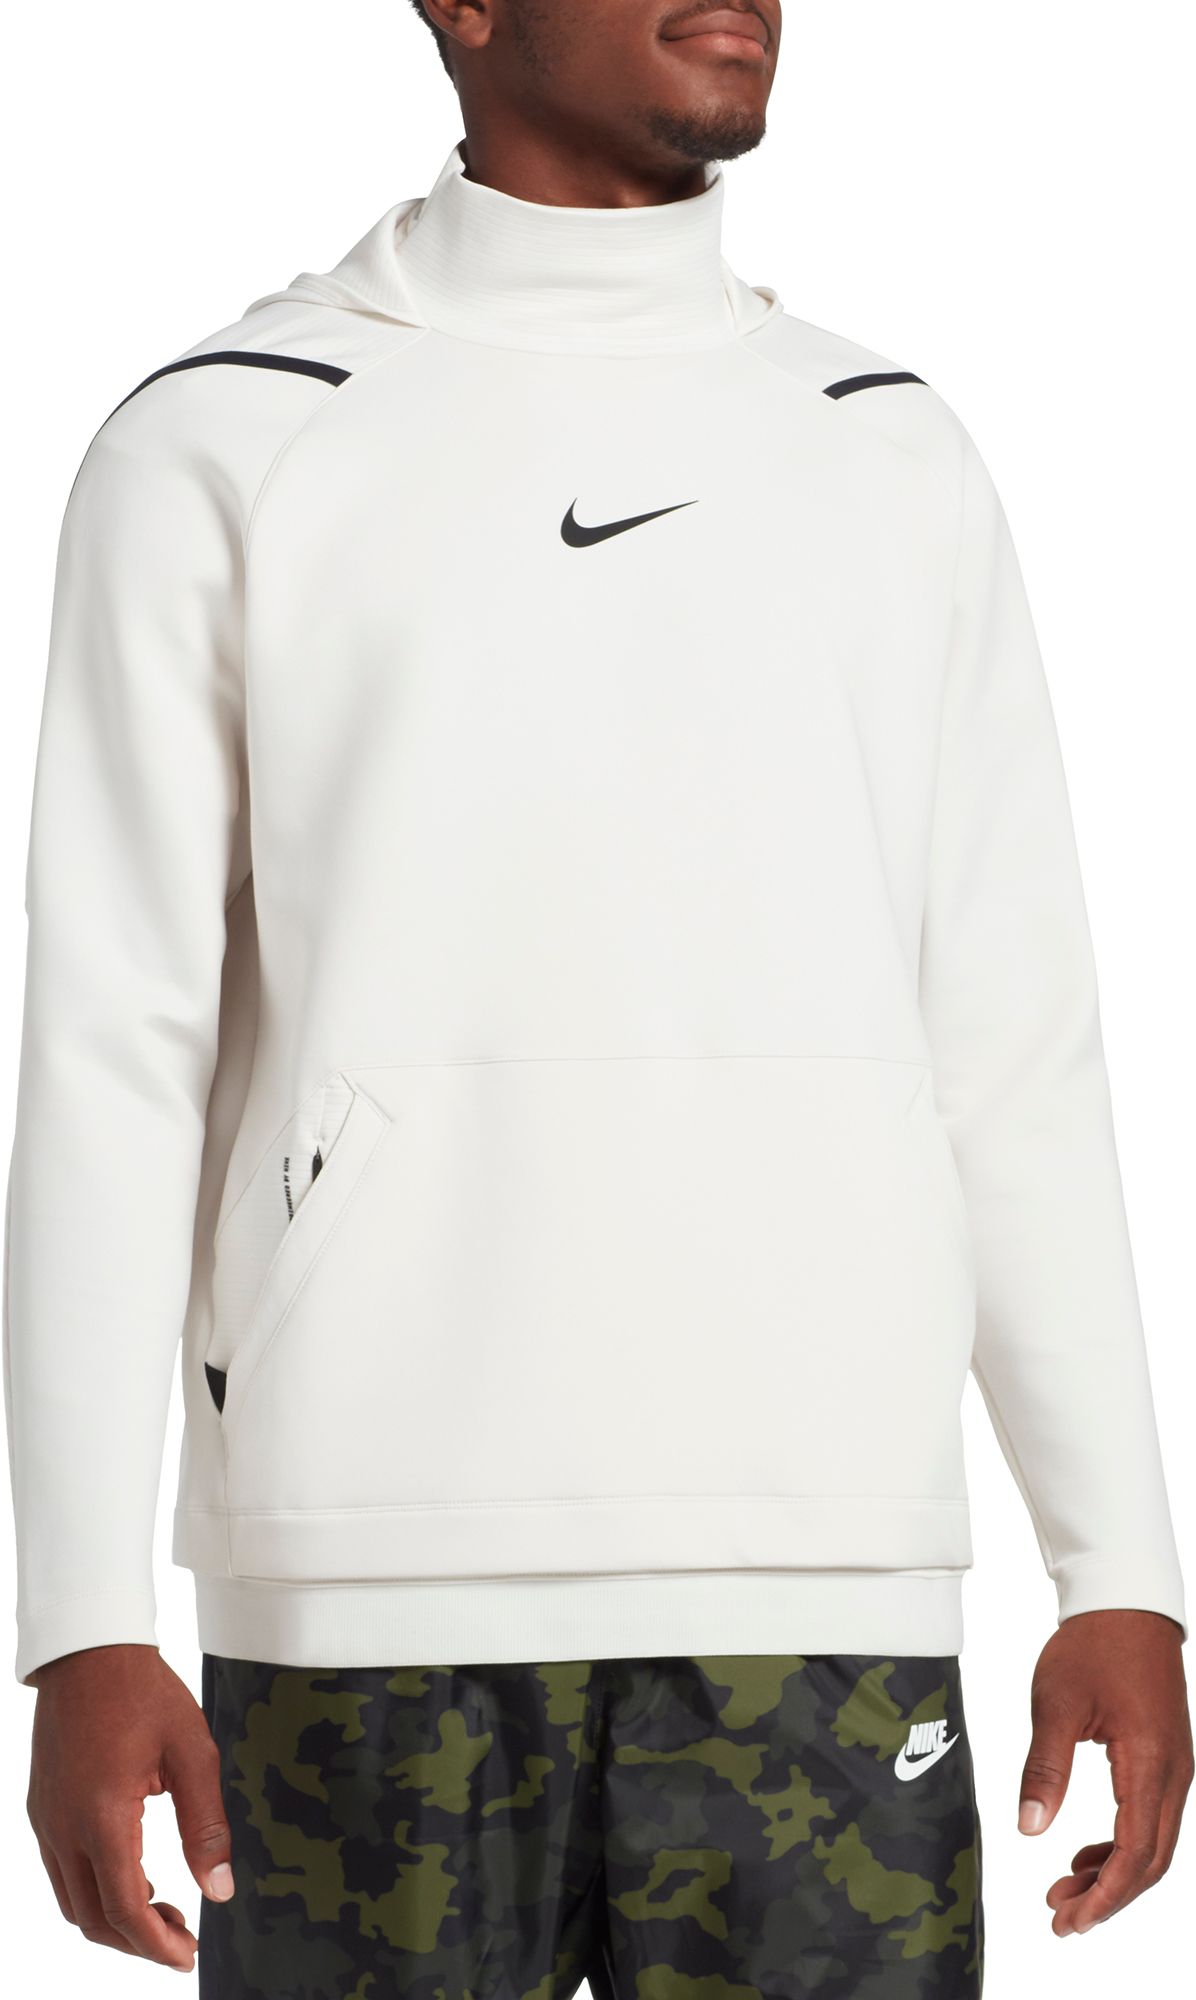 Nike Men's Pro Pullover Hoodie (Regular and Big & Tall) - .97 - .25